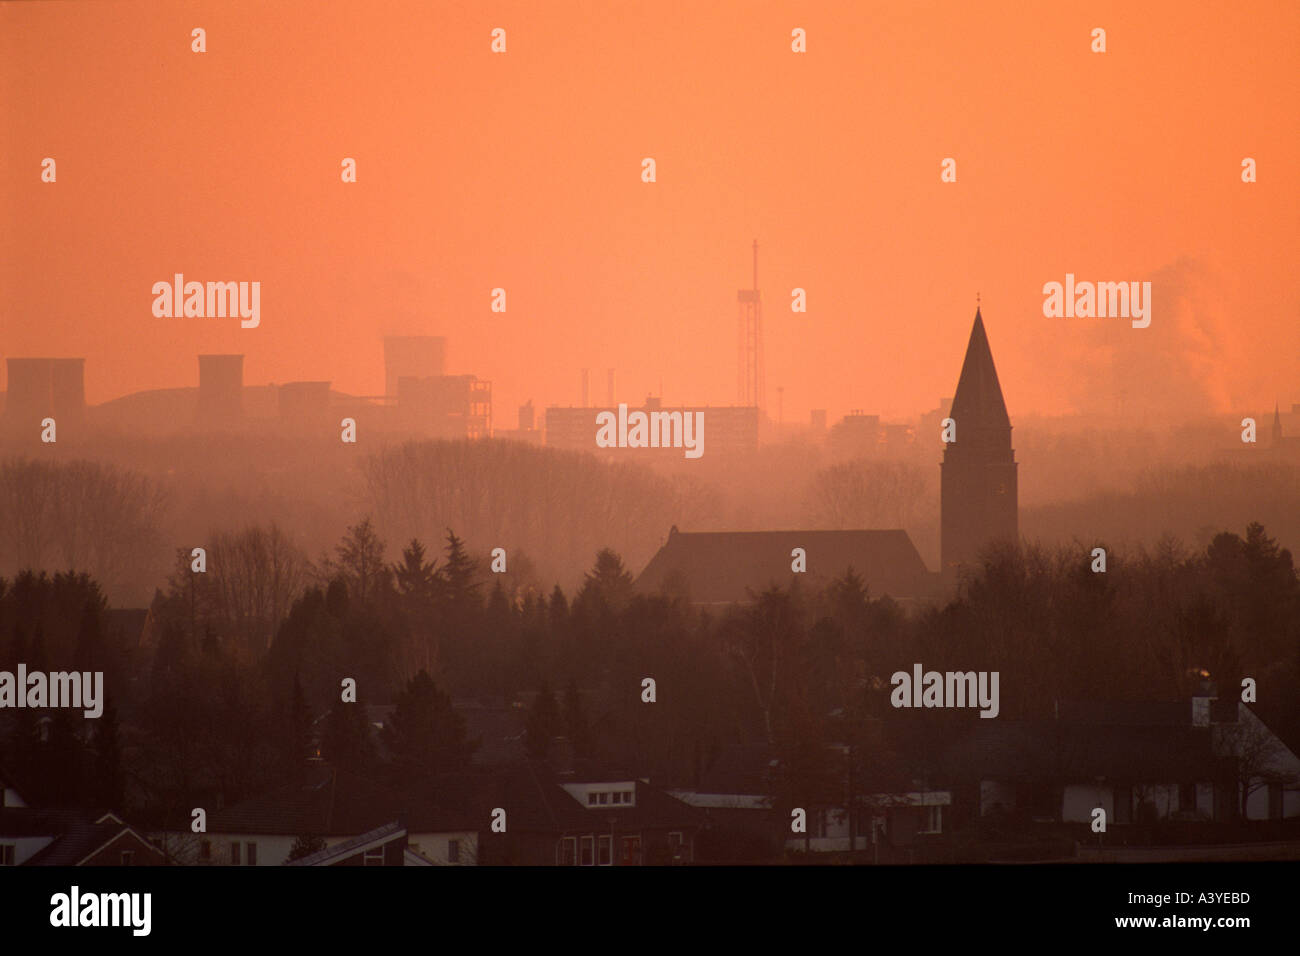 Geleen and Sittard in South Limburg at sunset with a coloured grad filter Stock Photo